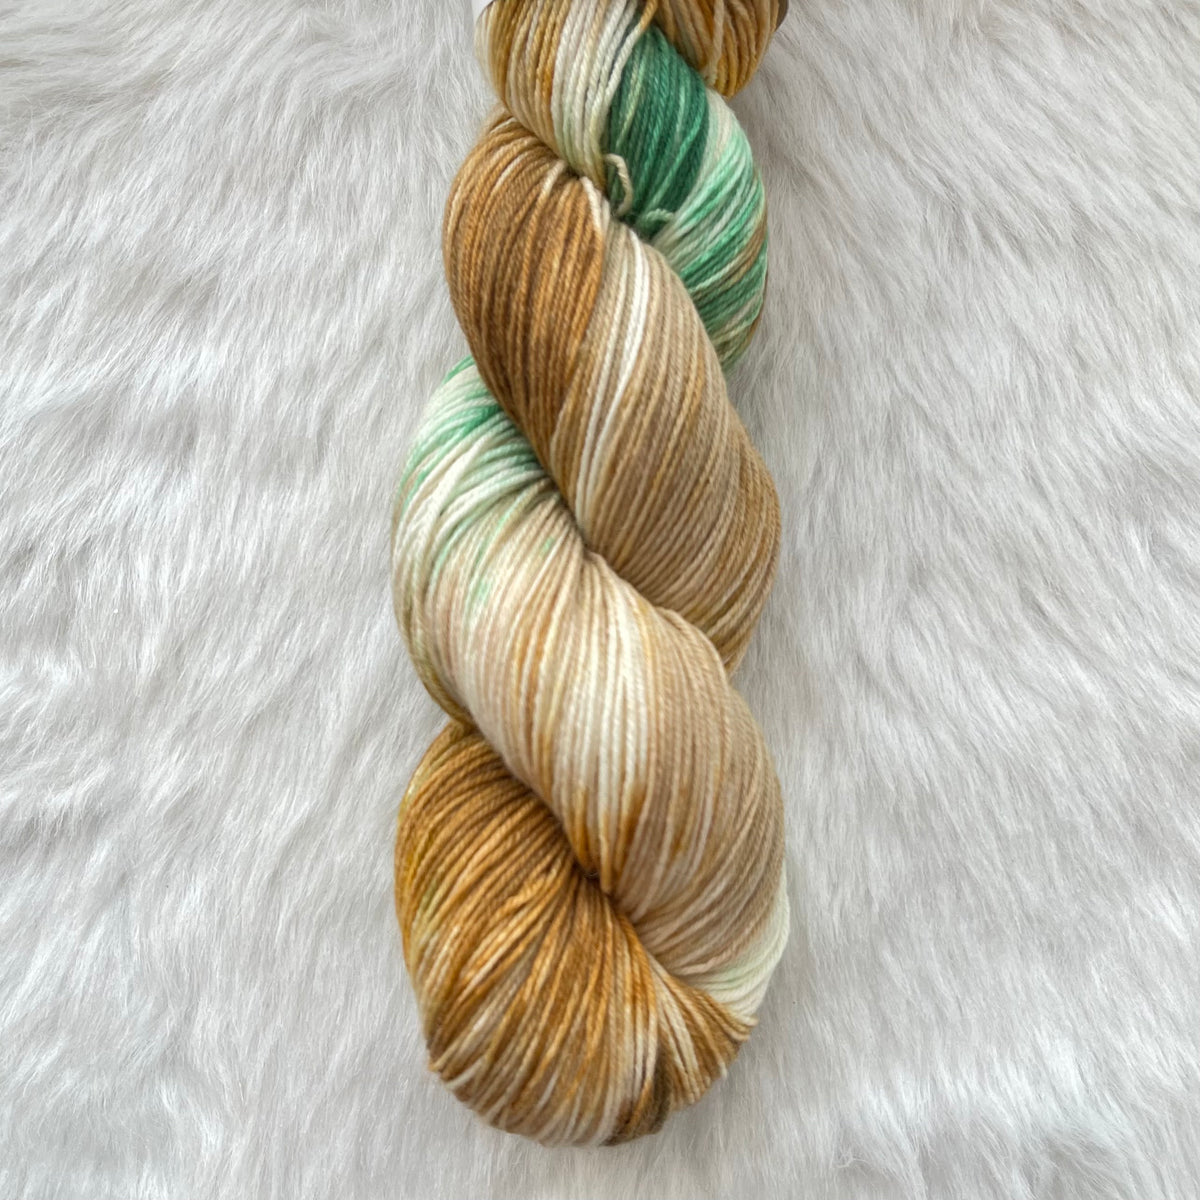 WOODLAND TRAIL  -Ready to Ship - BFL Sock- Hand Dyed Yarn Skein